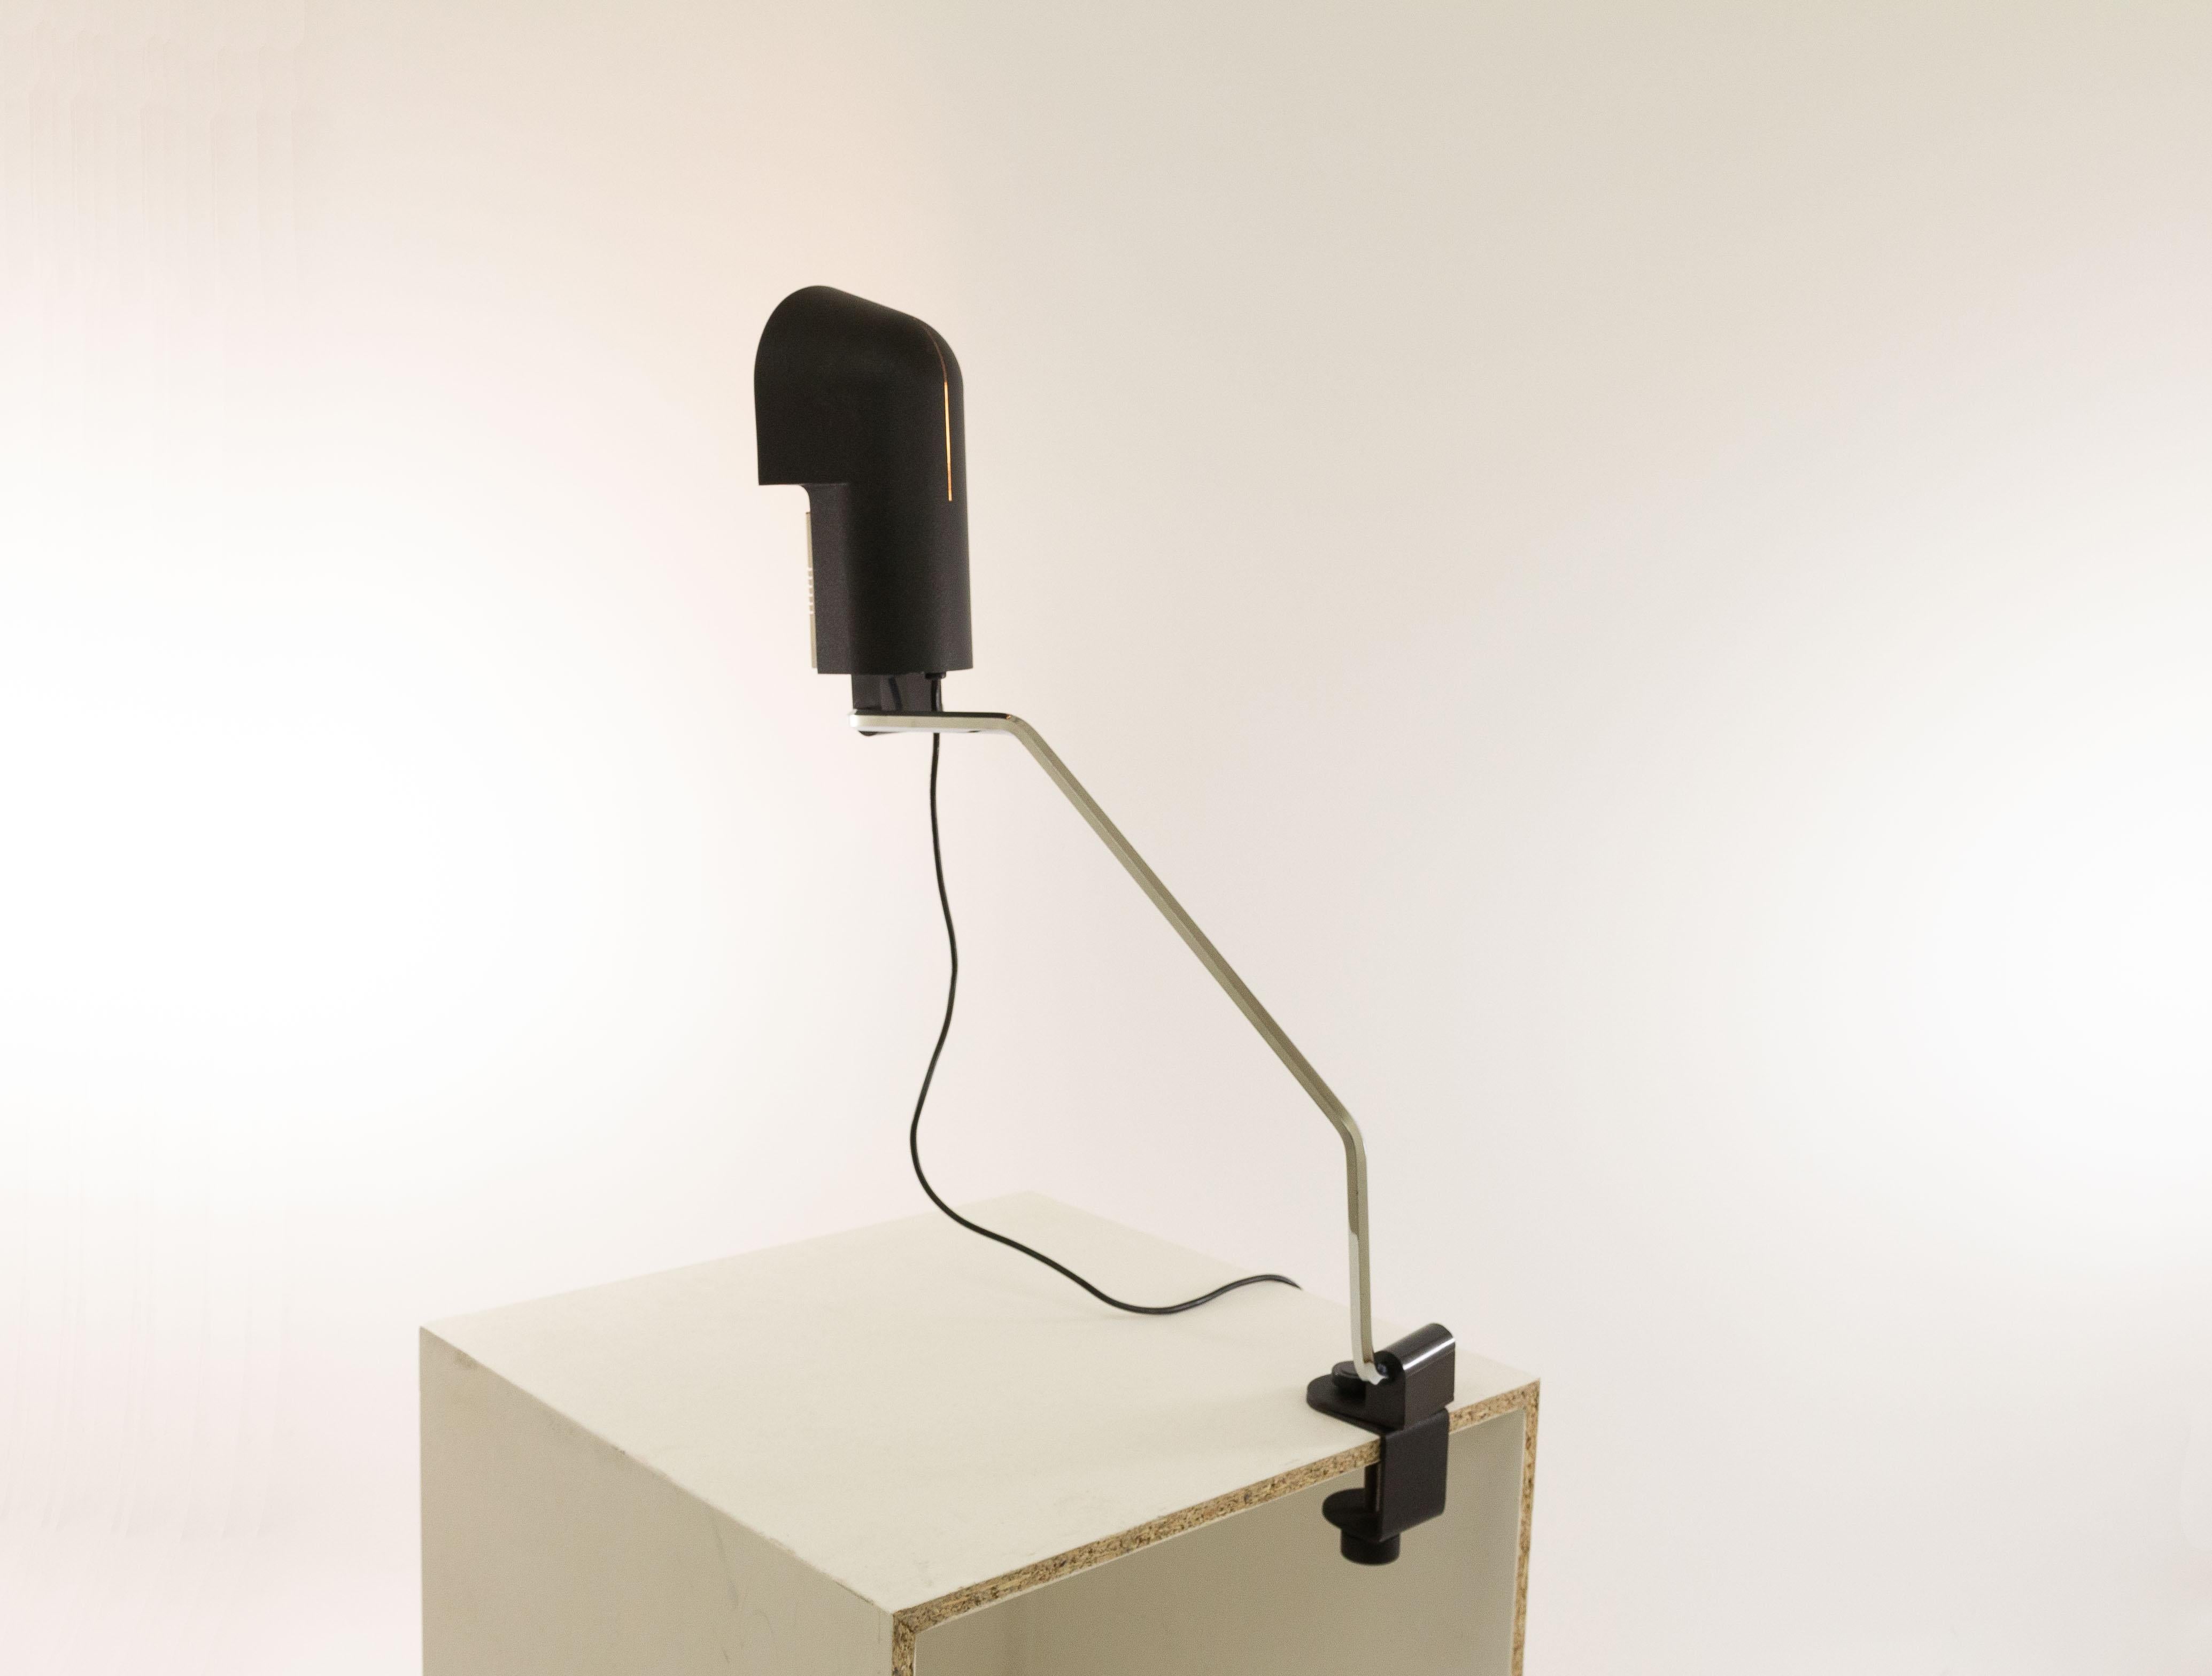 Polychromed Black Pala Clamp Table Lamp by Corrado and Luigi Aroldi for Luci, 1970s For Sale